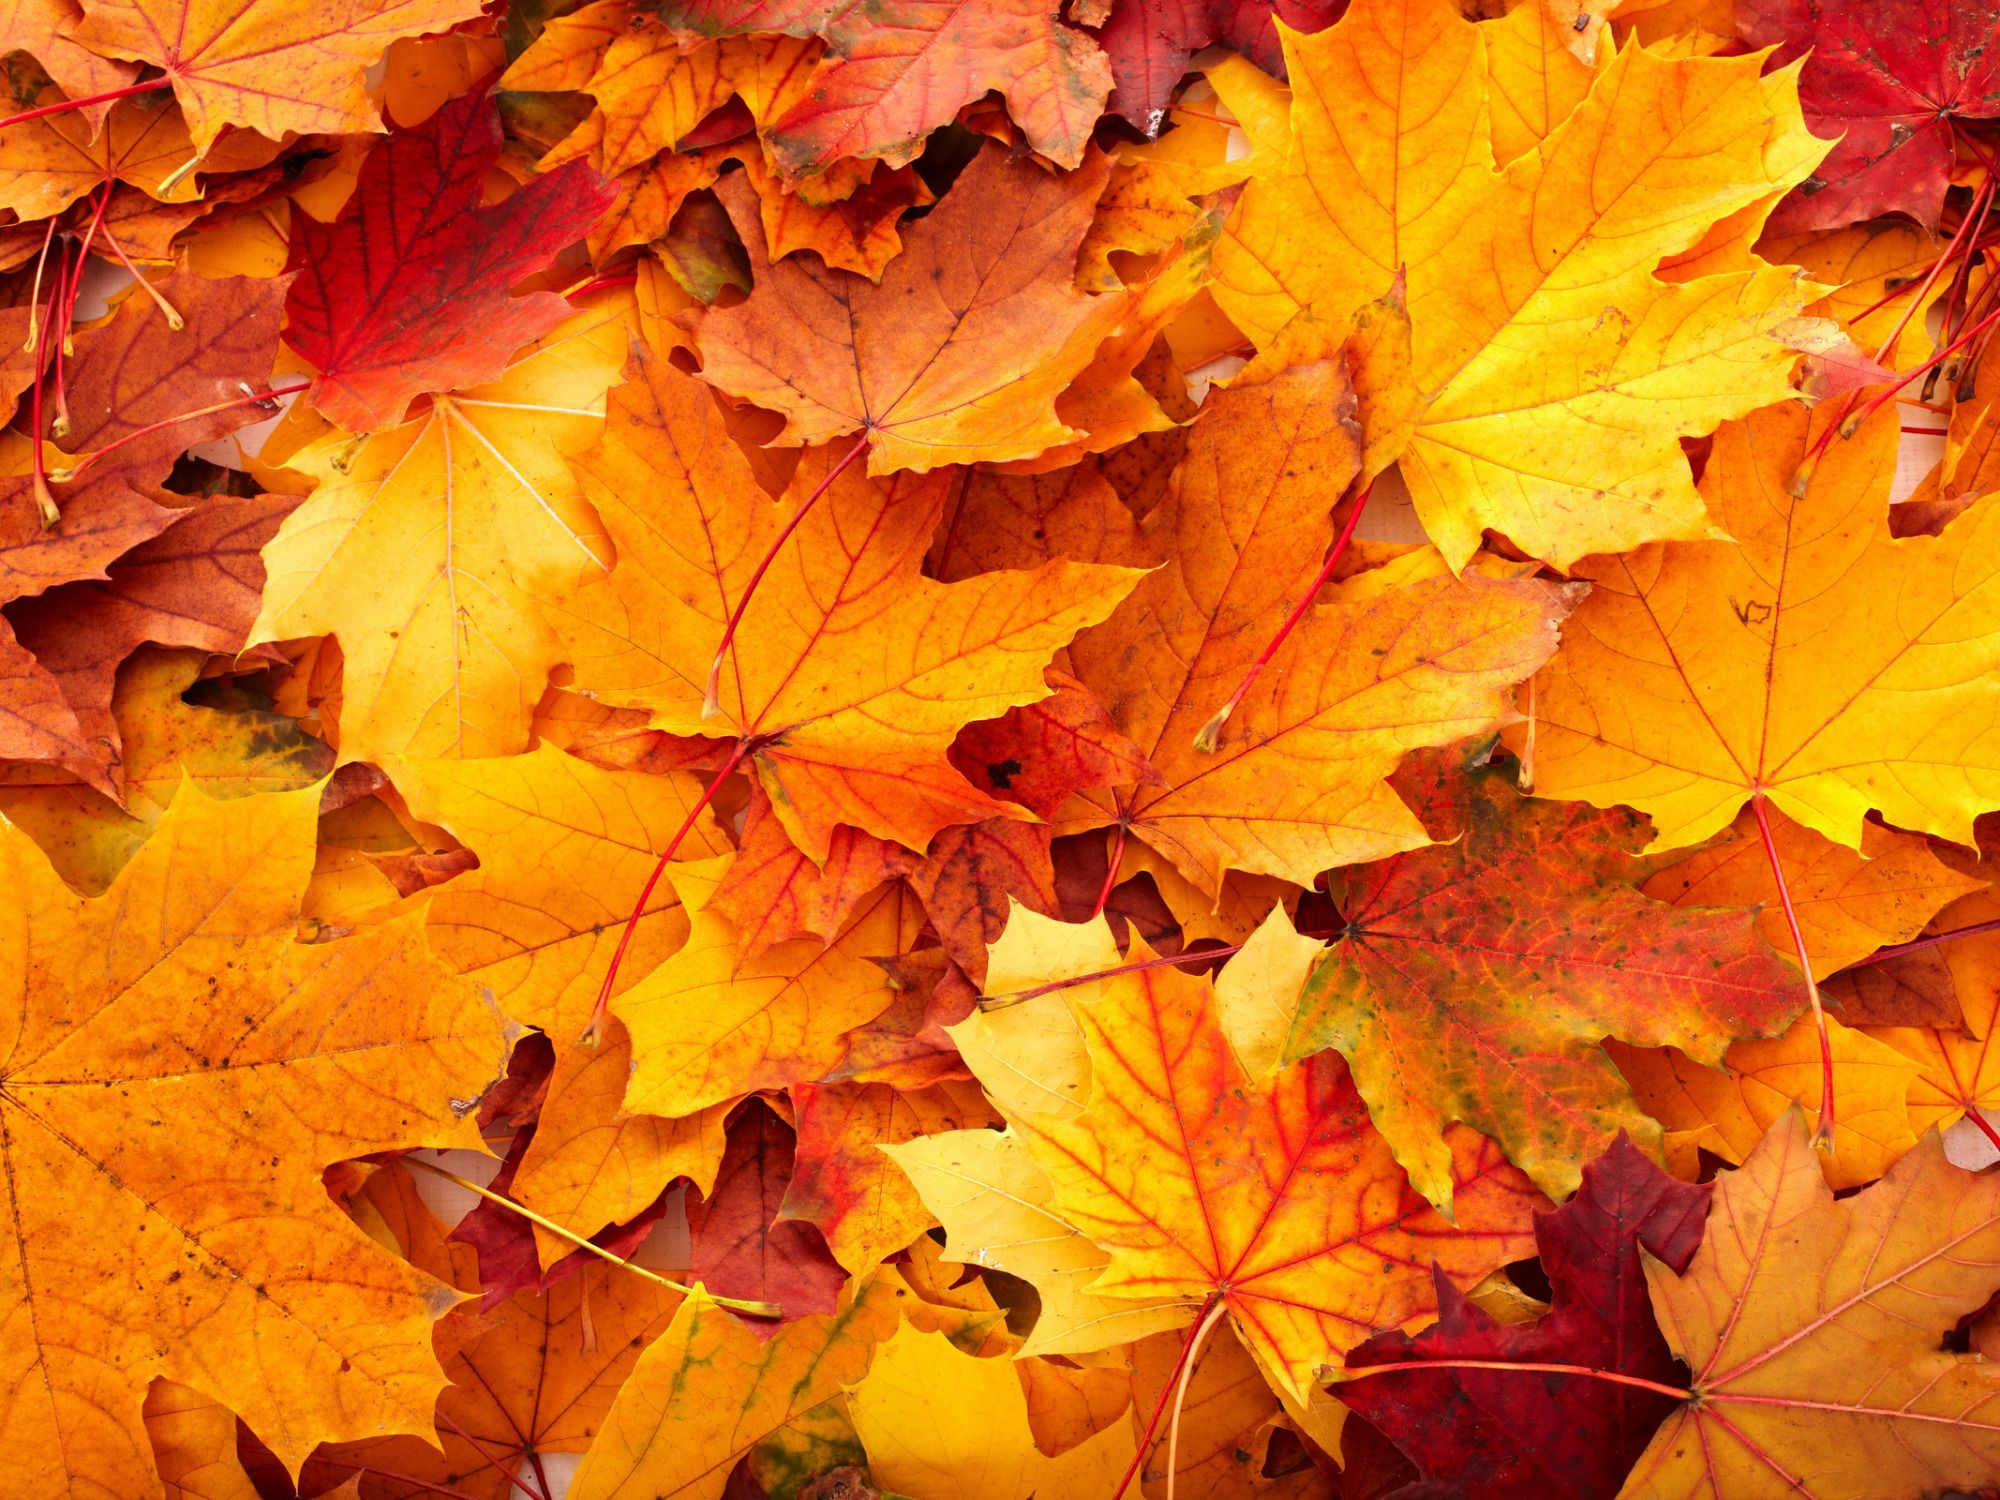 Autumn Leaves Wallpaper With Yellow Color Leaves Beautiful Autumn Wallpaper For Interior Wall Decor Idea Fall Scenery Background Fall Leaves Desktop Wallpaper Free Autumn Desktop